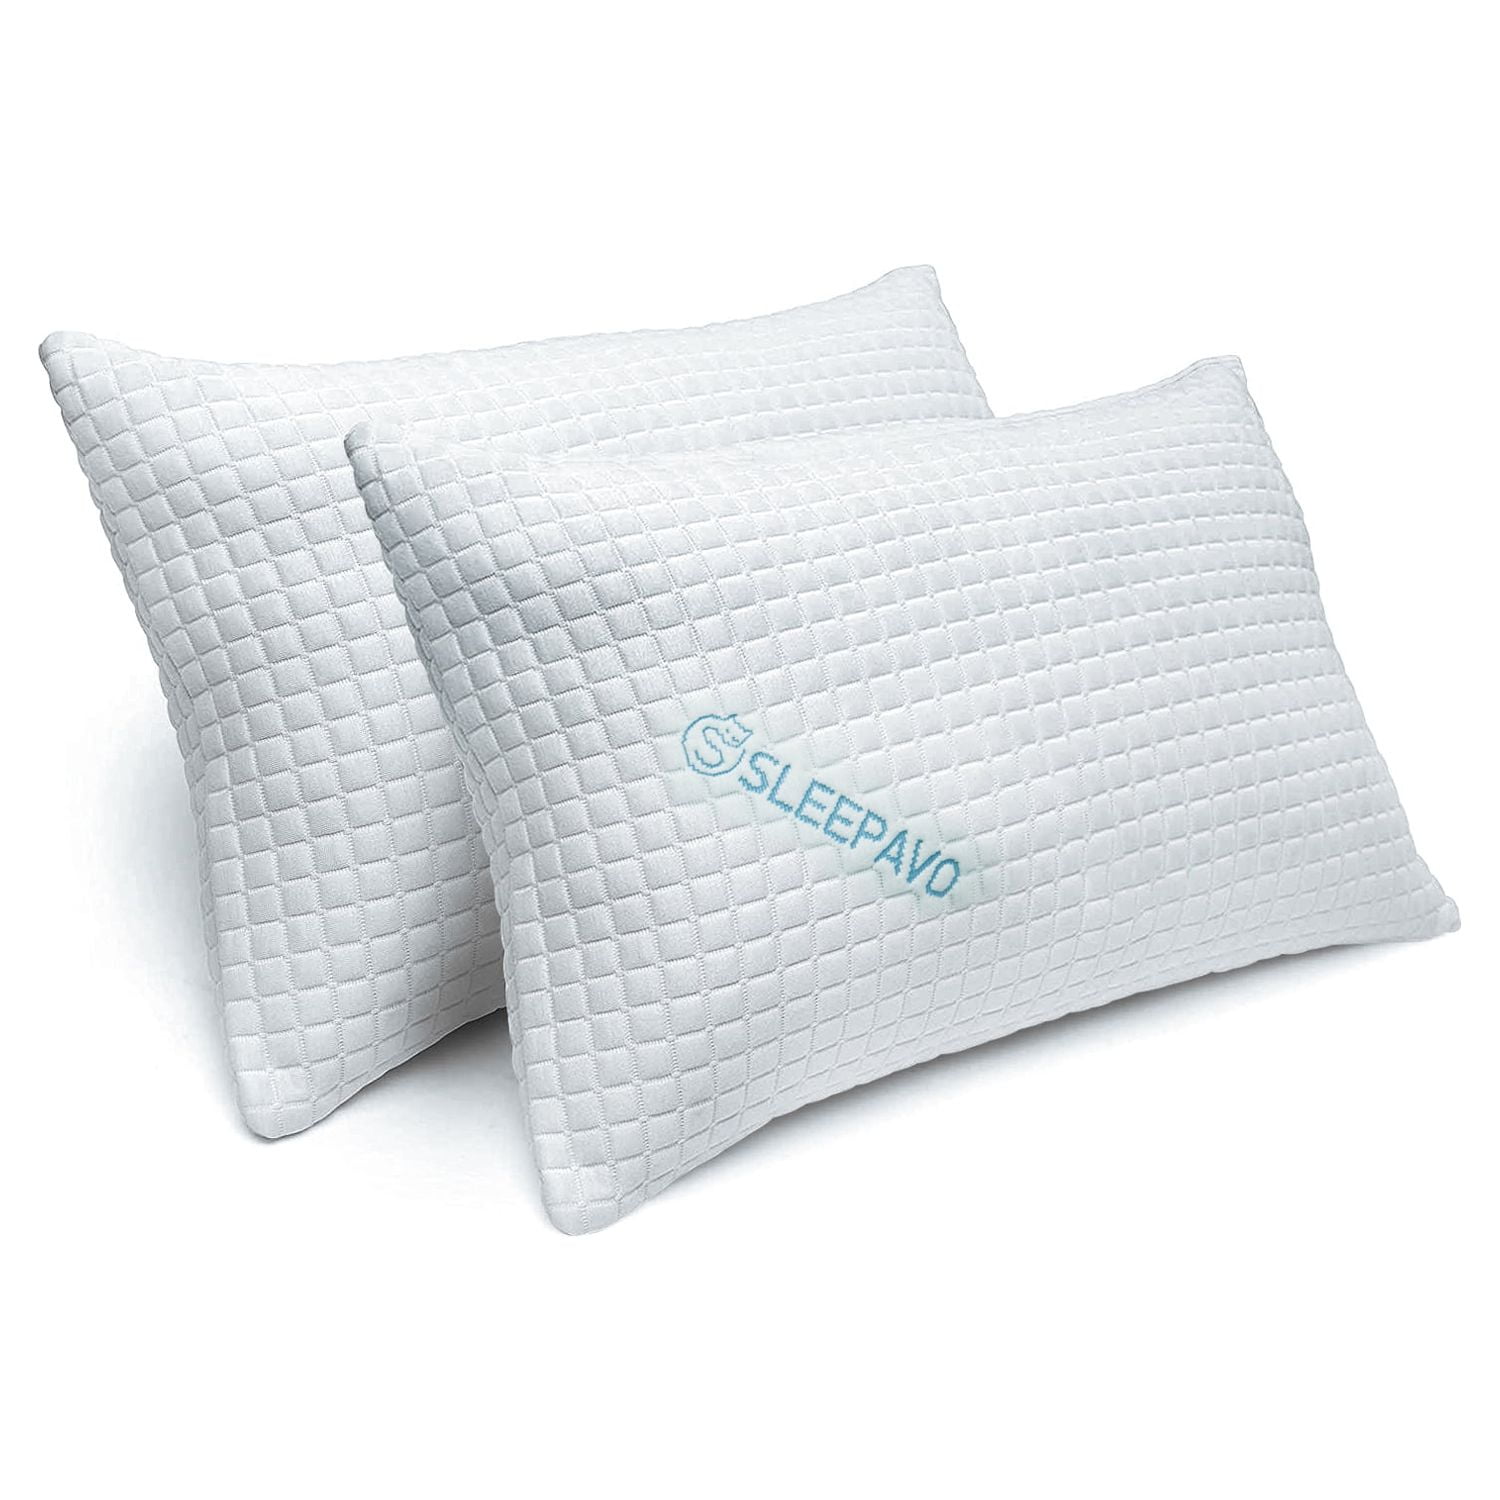 Sleep Restoration Bed Pillows for Sleeping - Queen Size Set of 2